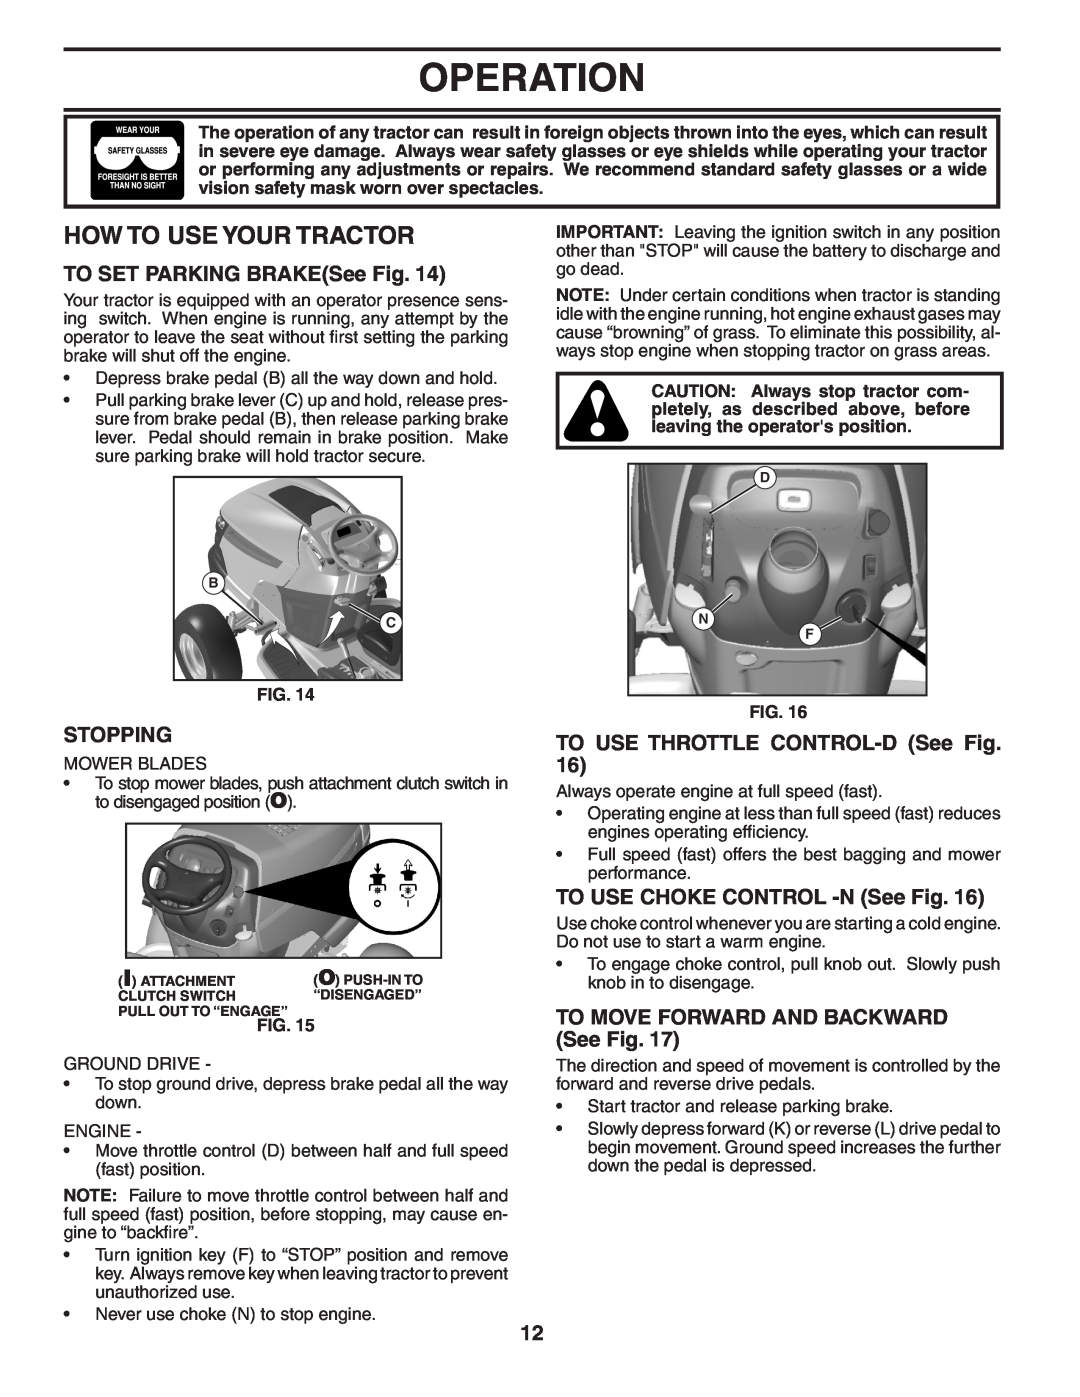 Poulan PBGTGE How To Use Your Tractor, TO SET PARKING BRAKESee Fig, Stopping, TO USE THROTTLE CONTROL-DSee Fig, Operation 